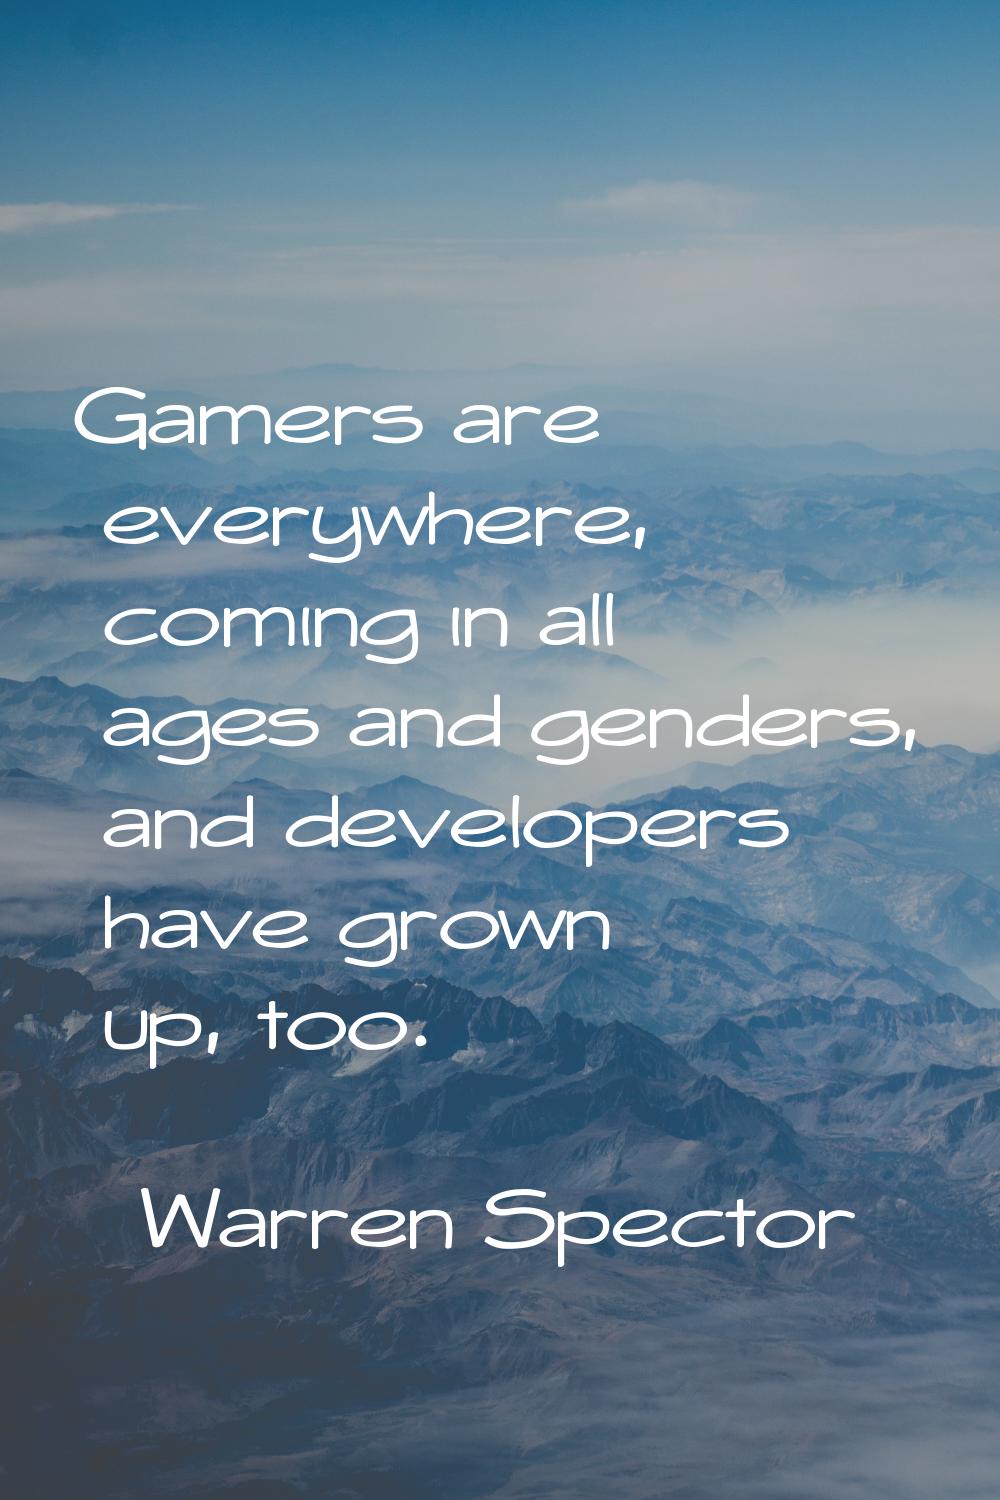 Gamers are everywhere, coming in all ages and genders, and developers have grown up, too.